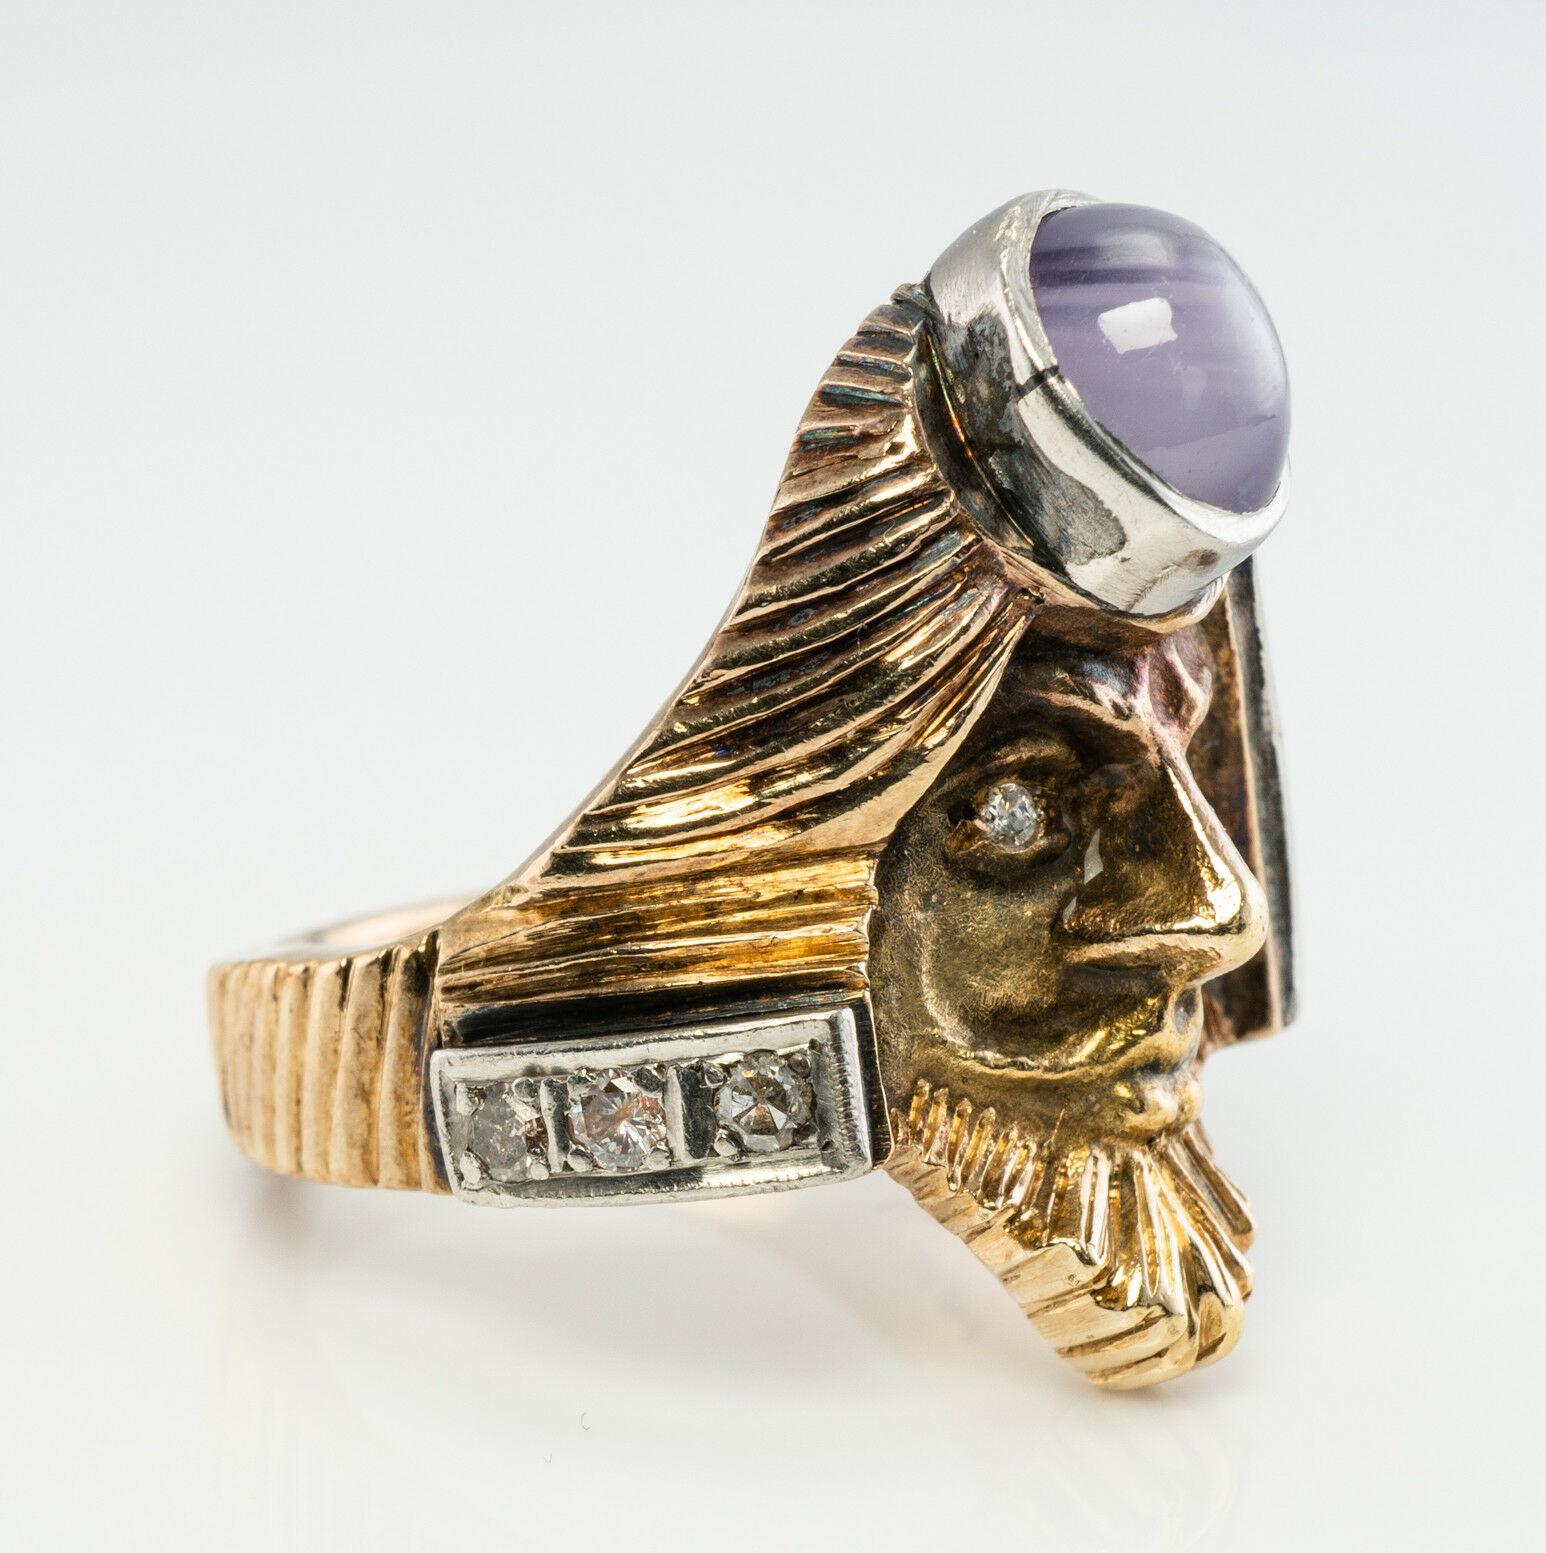 This unique and one of a kind vintage ring is finely crafted in solid 14K Yellow gold and made in the shape of a man's face. The details of this piece are amazing, it is like a miniature sculpture made of gold. The genuine Earth mined white gold